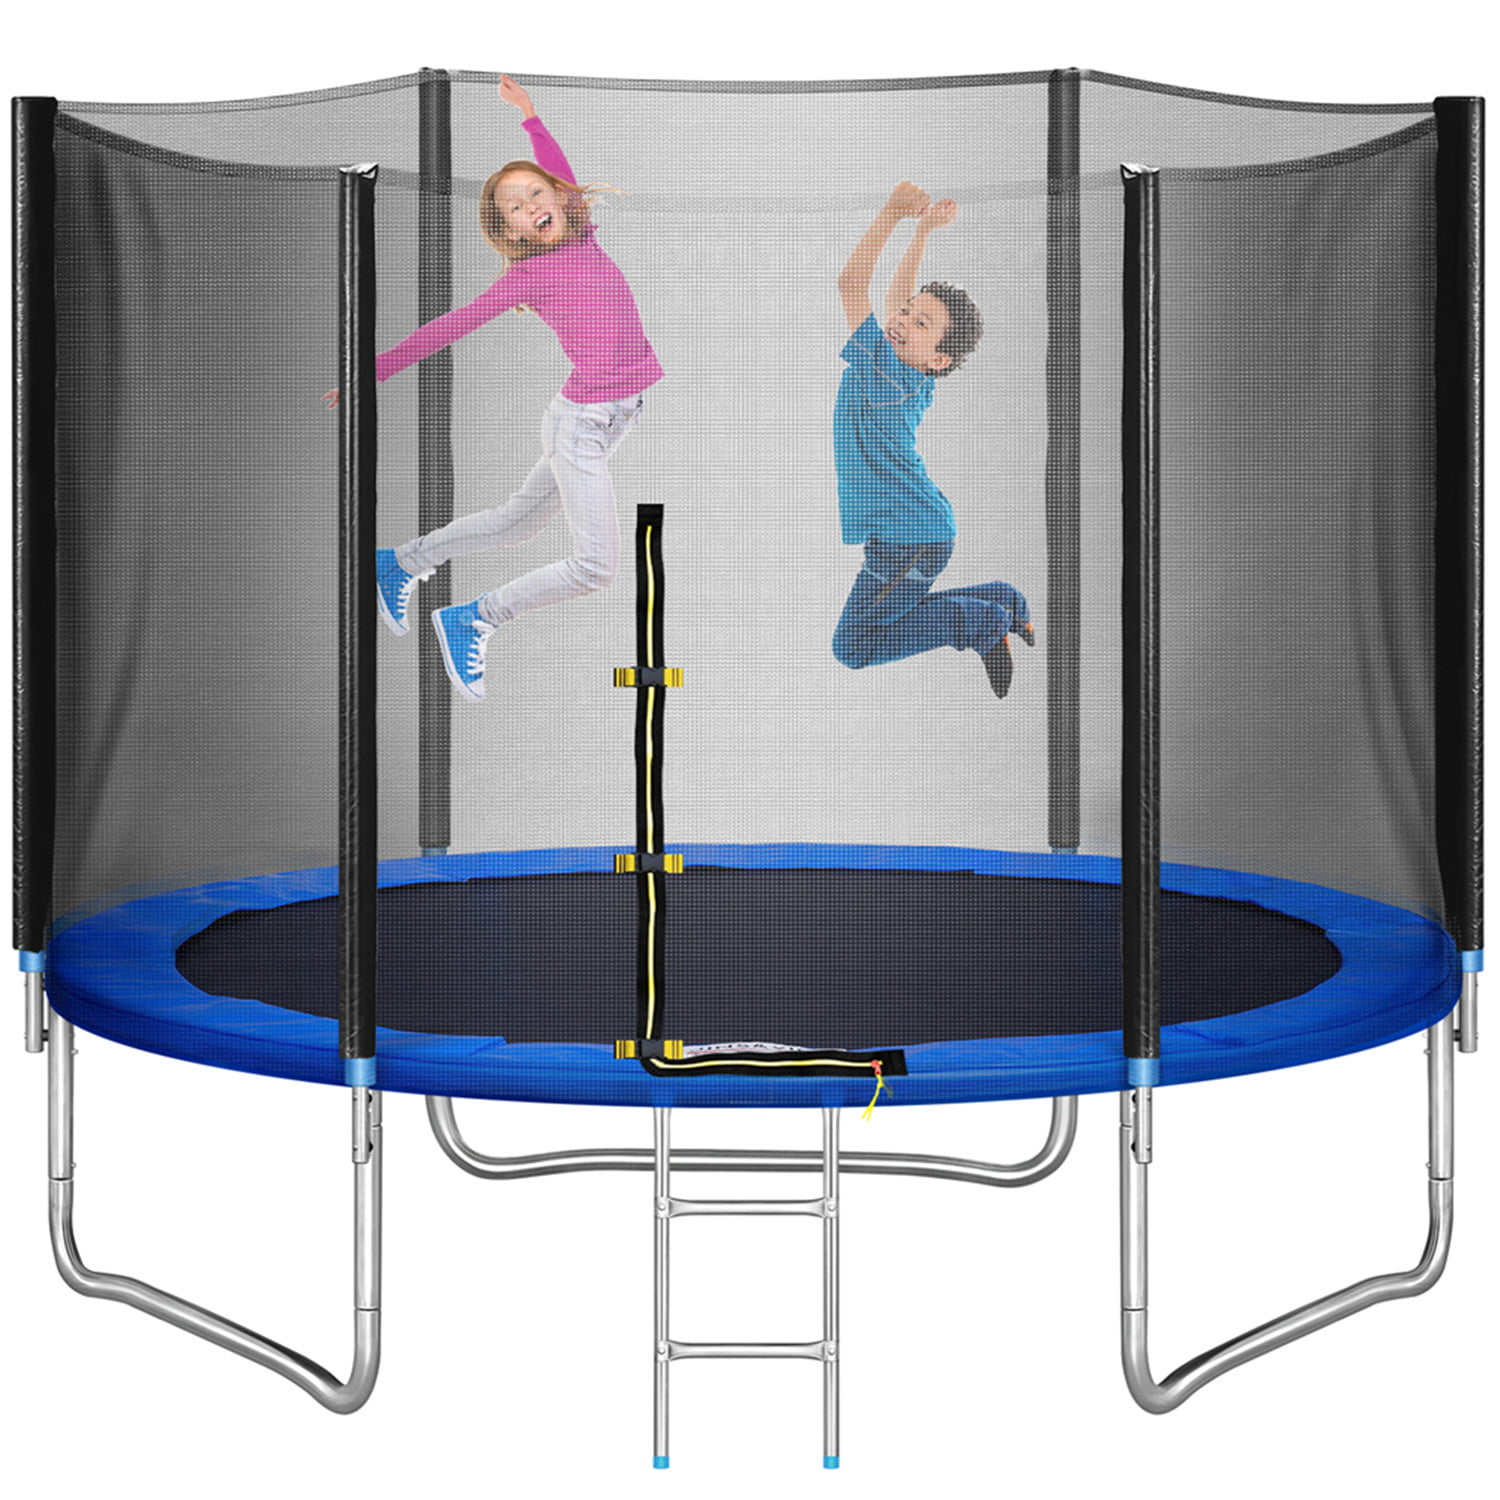 Kids Trampoline W/Safety Enclosure Net Indoor/Outdoor Round Bounce Jumper Heavy Duty Toddler Trampolines with Jumping Mat,Great Gift 5FT-3, from US 